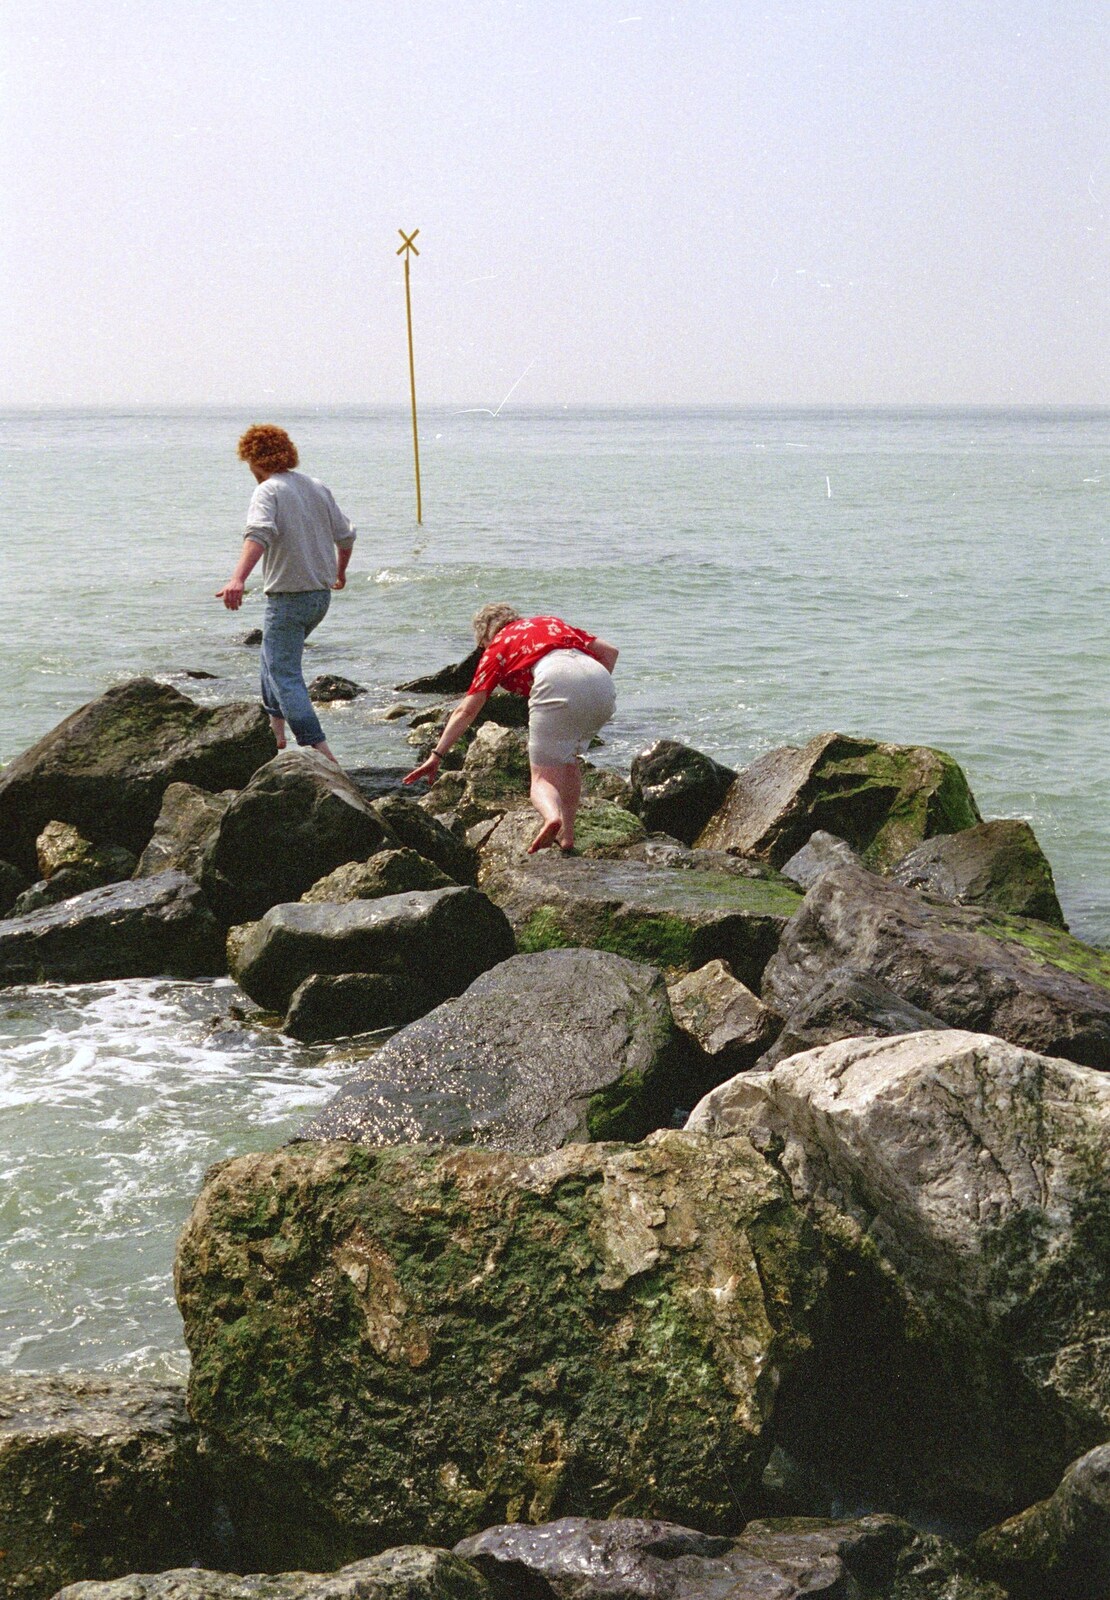 Wavy and Spam climb out on a groyne from A Brome Swan Trip to Wimereux, France - 20th June 1996